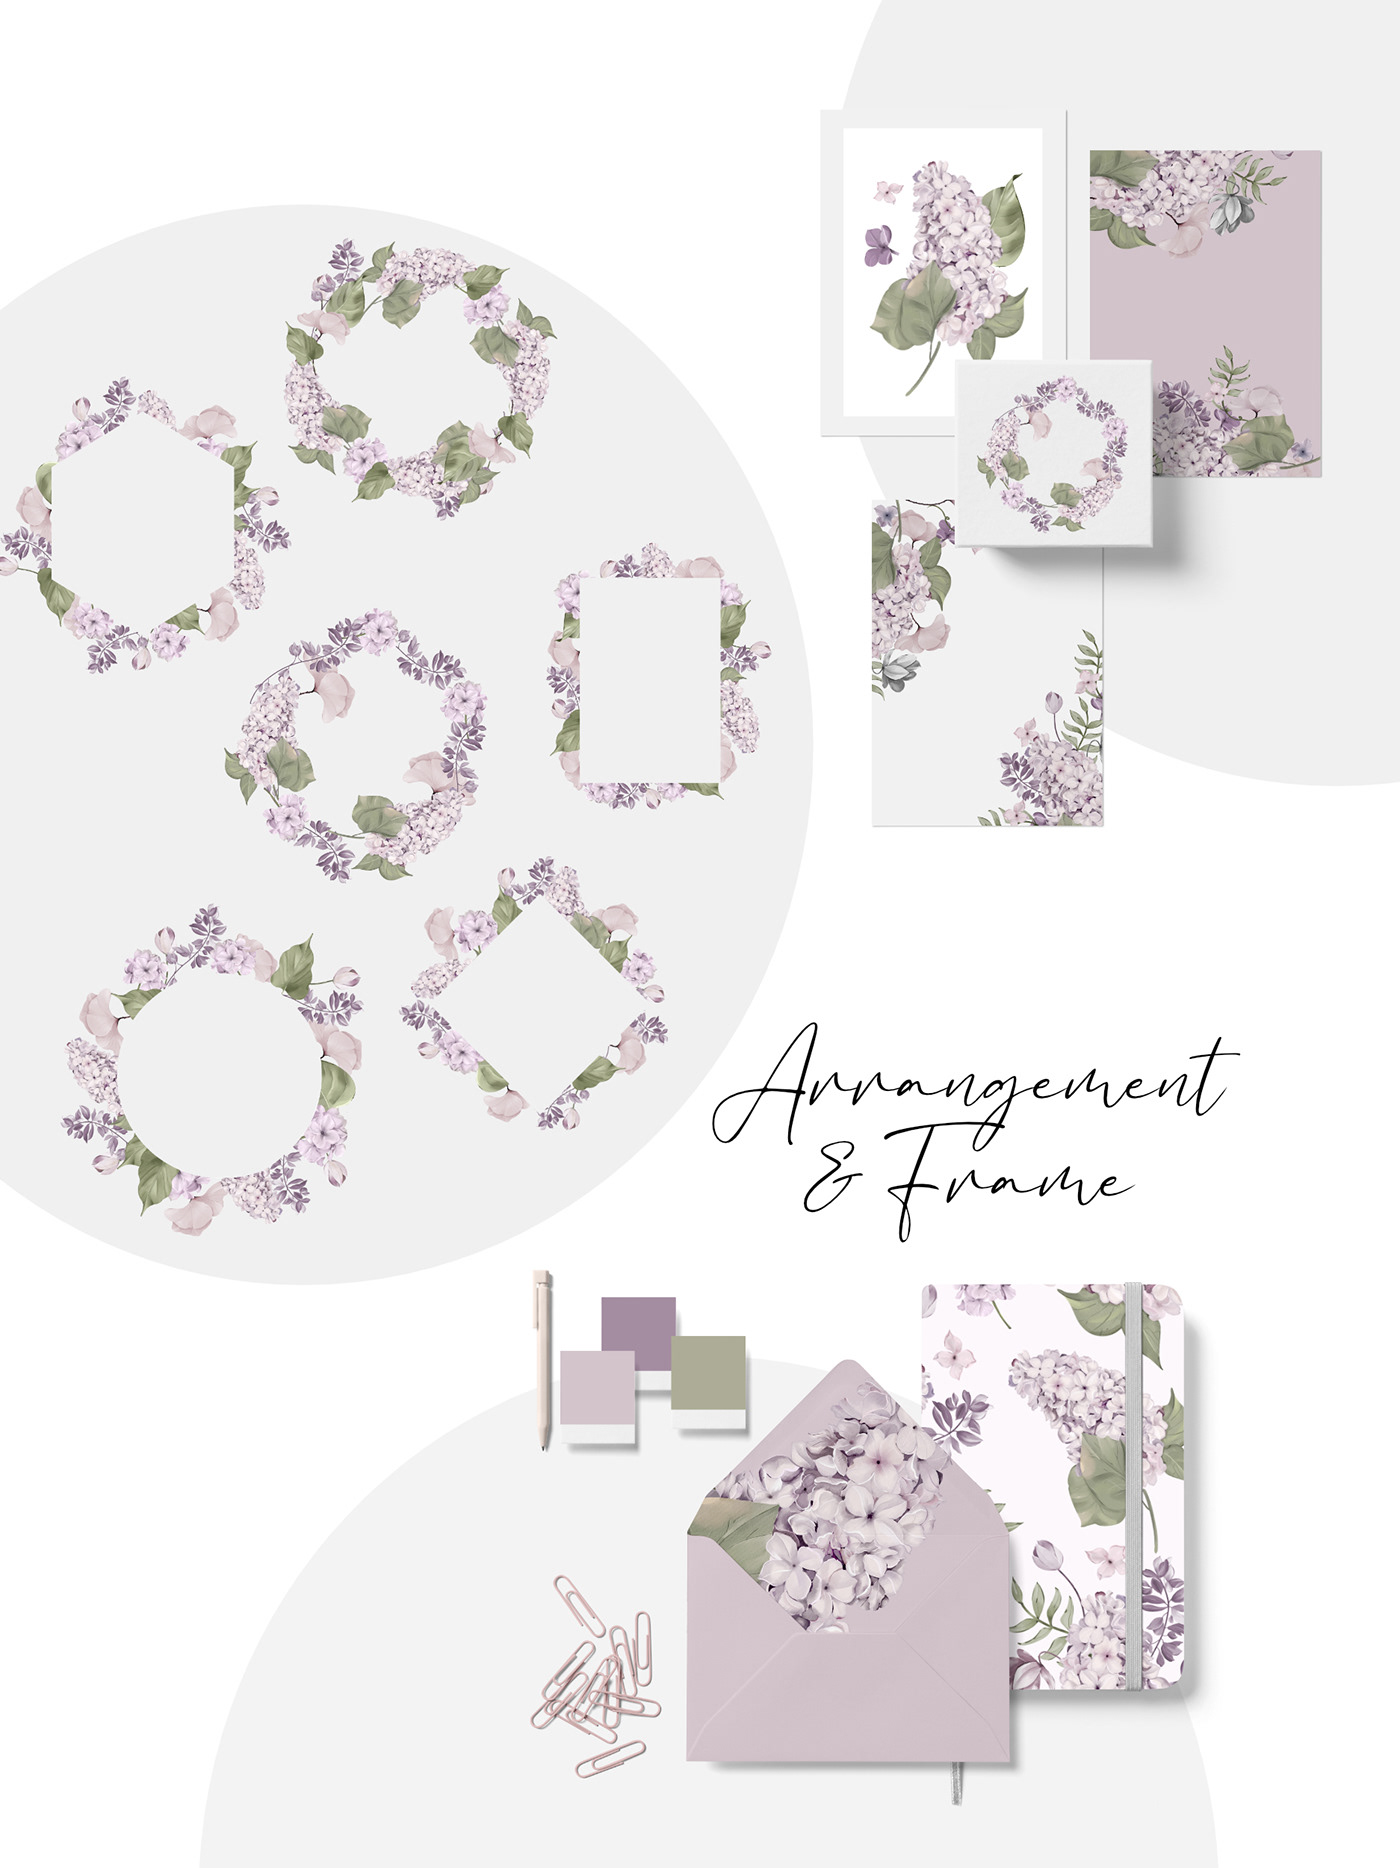 art artwork baby girl blossom blue botanical Bouquet clip detailed draw Drawing  elegance elements fabric feminim floral floral pattern flower garden gentle girl graphic grey hand drawn invitations ladies lilac meadow Nature ornament painting   pattern pink